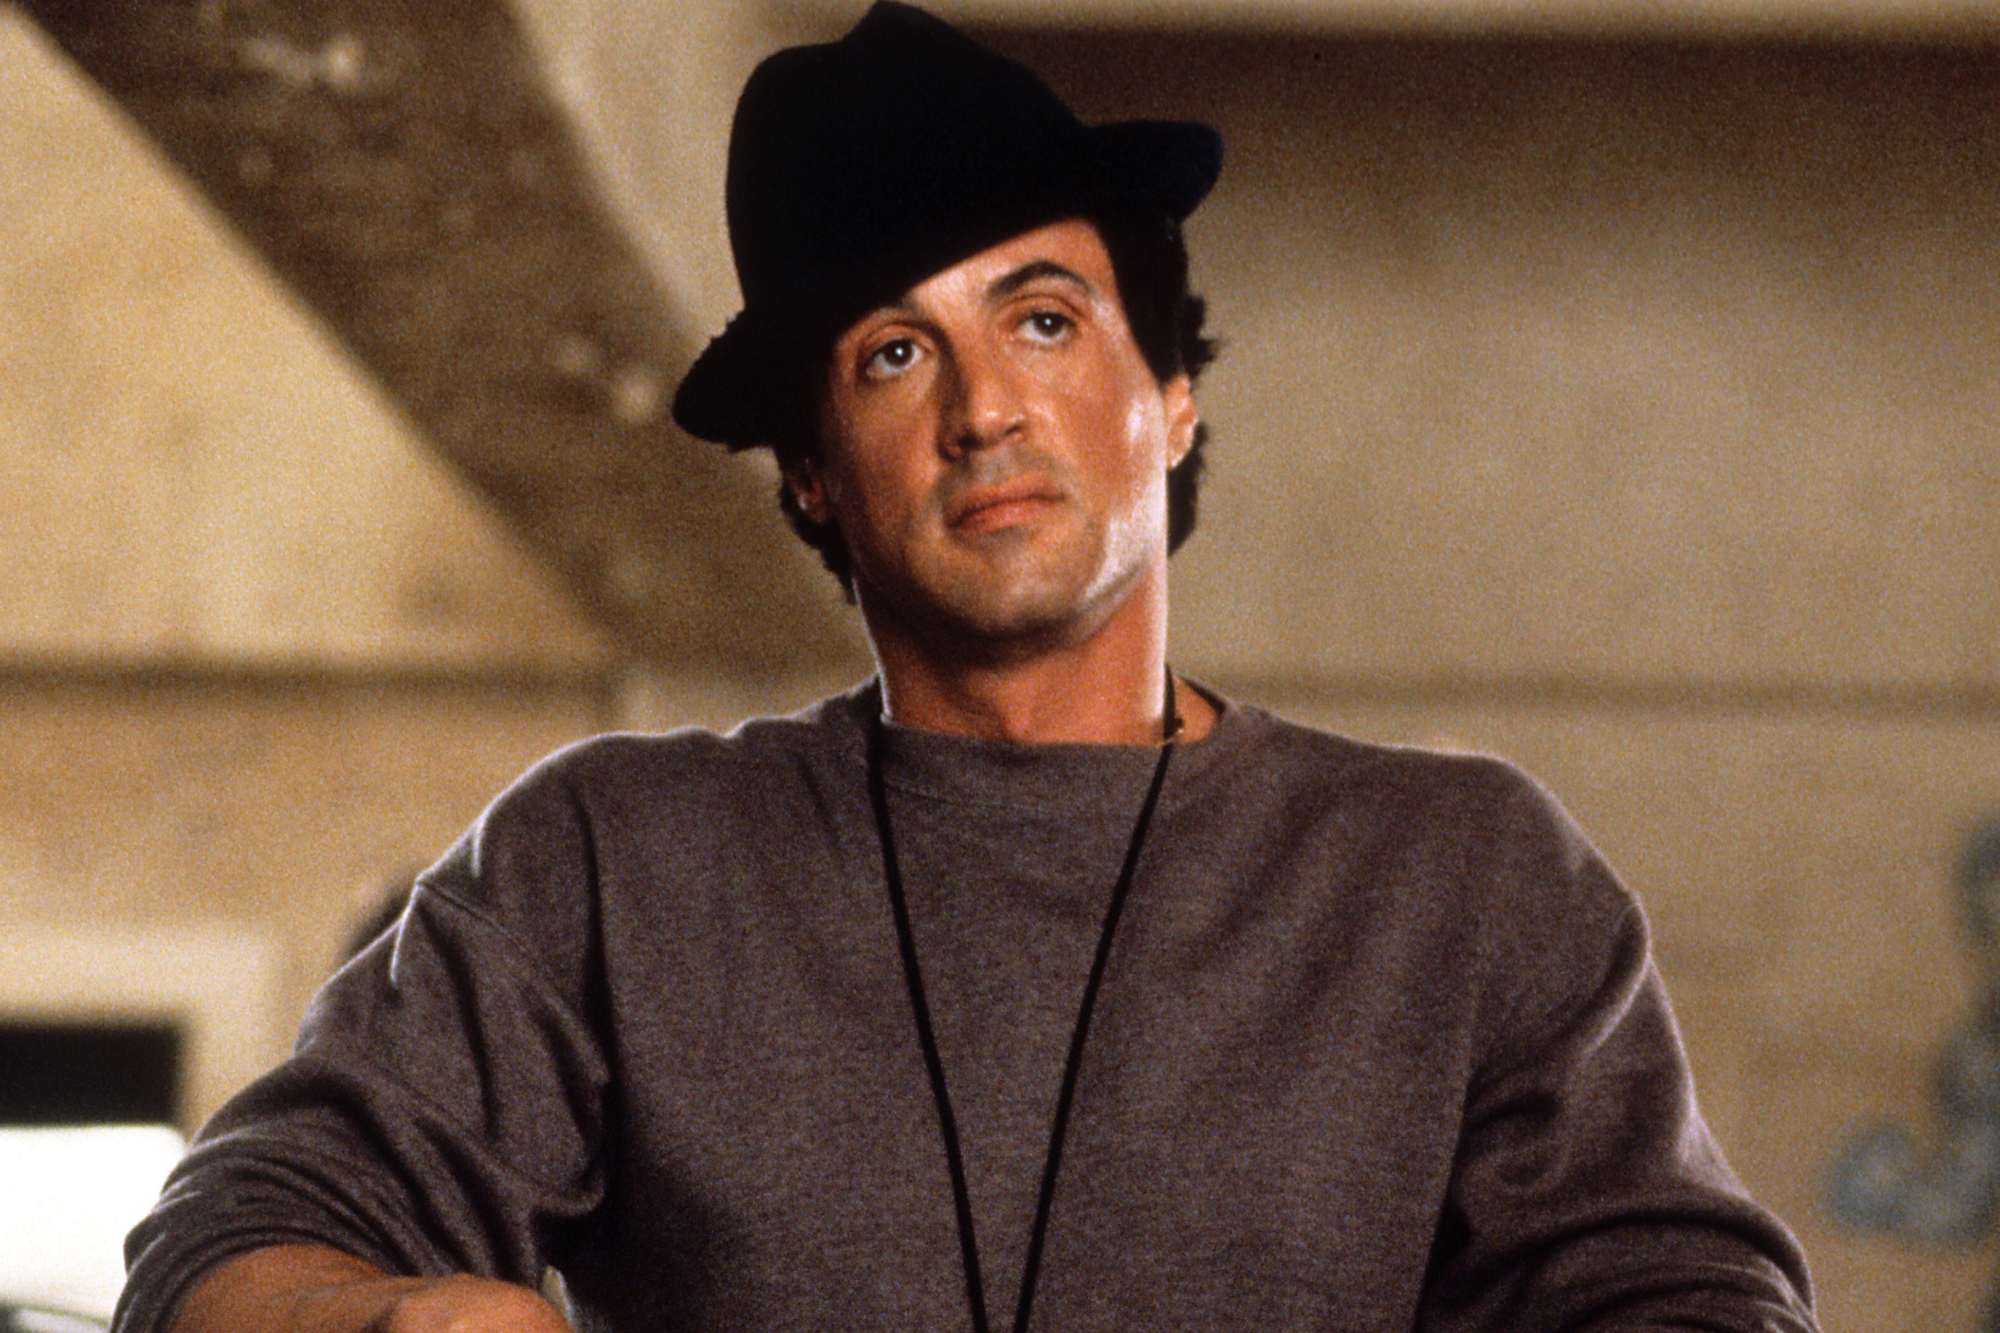 'Rocky V' movies - Sylvester Stallone as Rocky wearing a sweater and hat, with his arms resting over the side of the boxing ring.